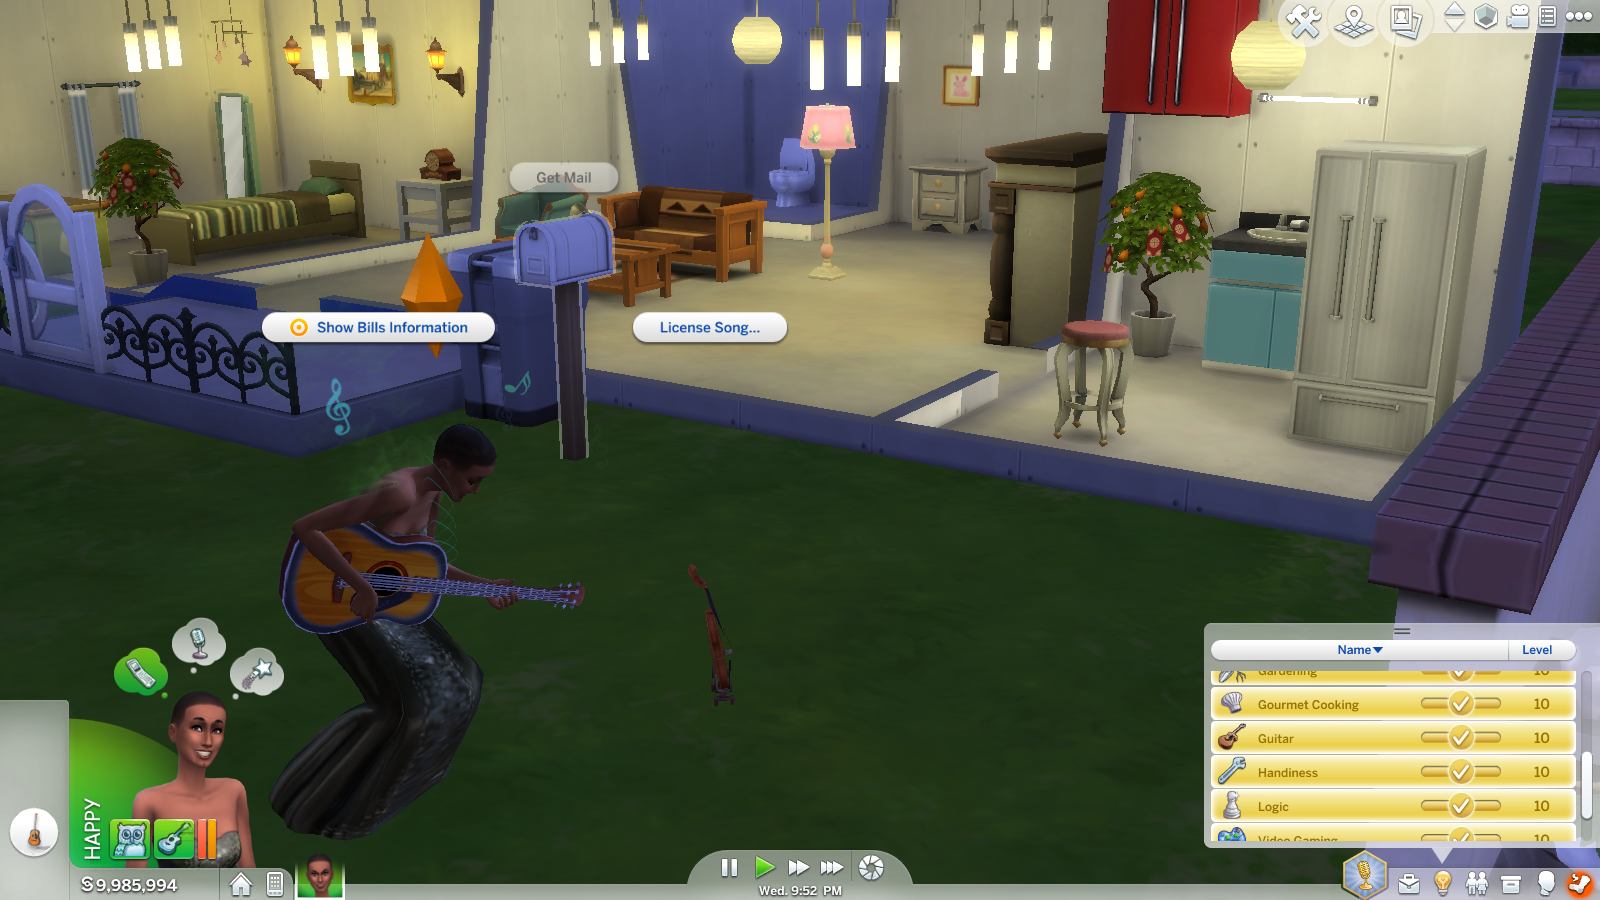 How To Write Songs In Sims 4